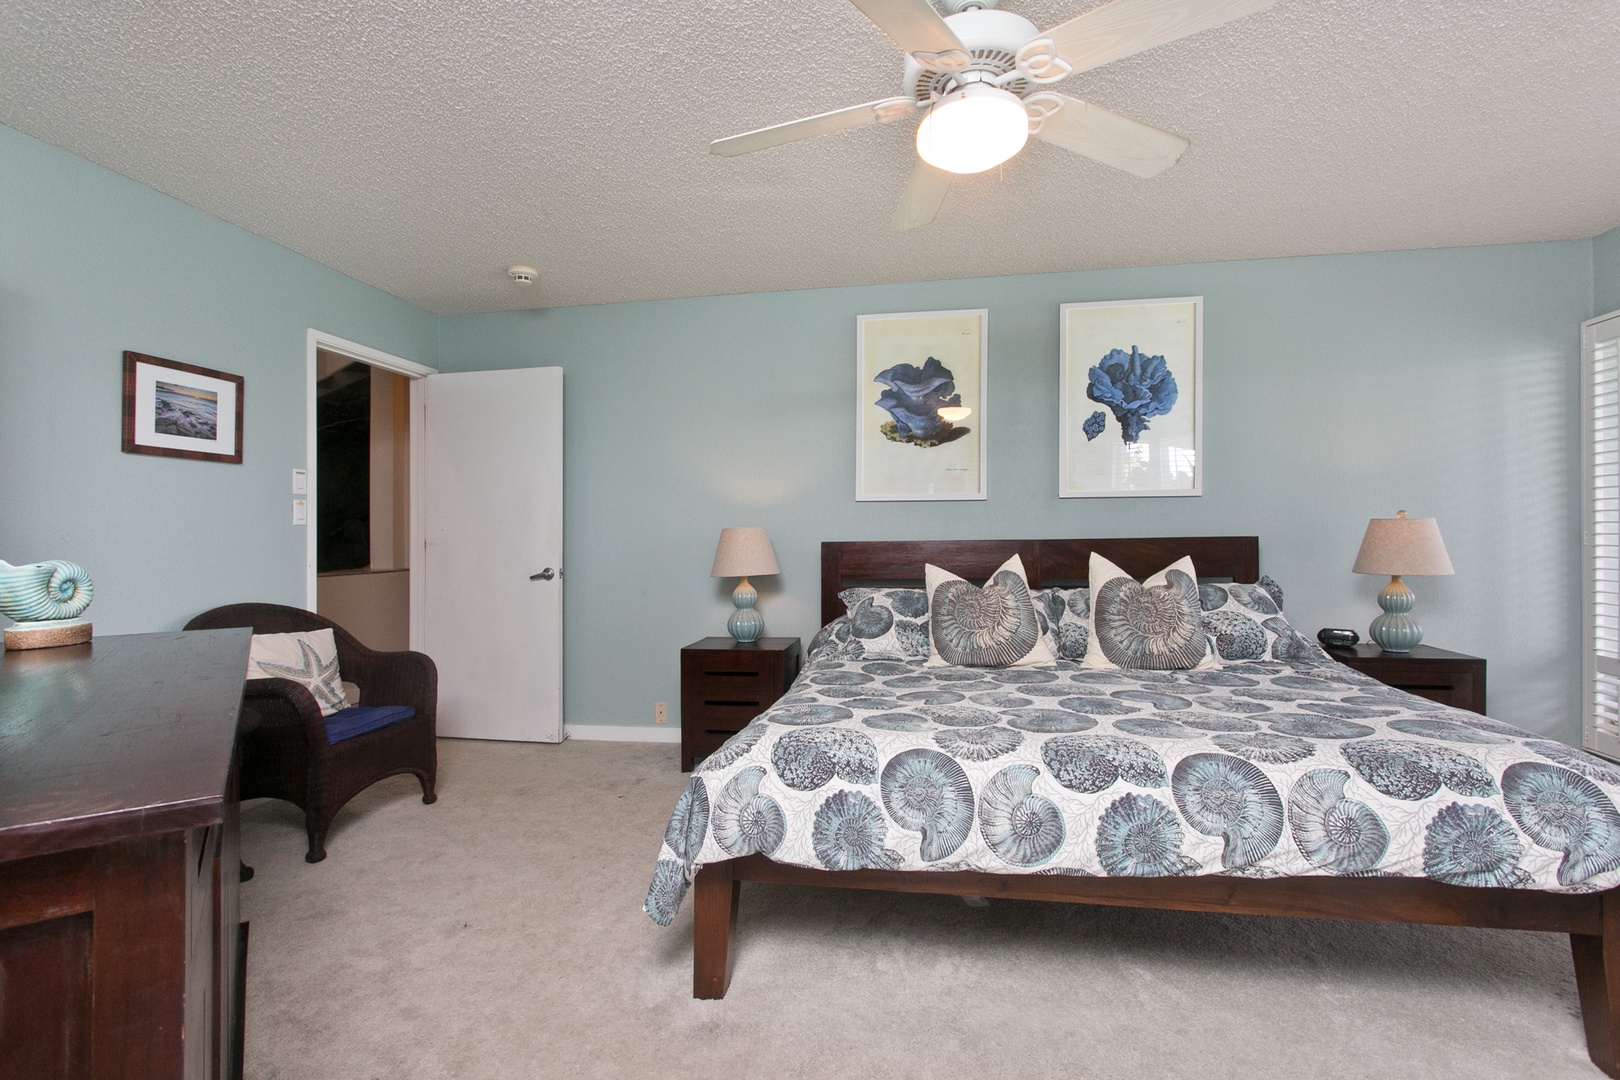 Kailua Vacation Rentals, Lanikai Village* - Hale Kolea: Guest bedroom with a plush king bed, TV and private lanai.